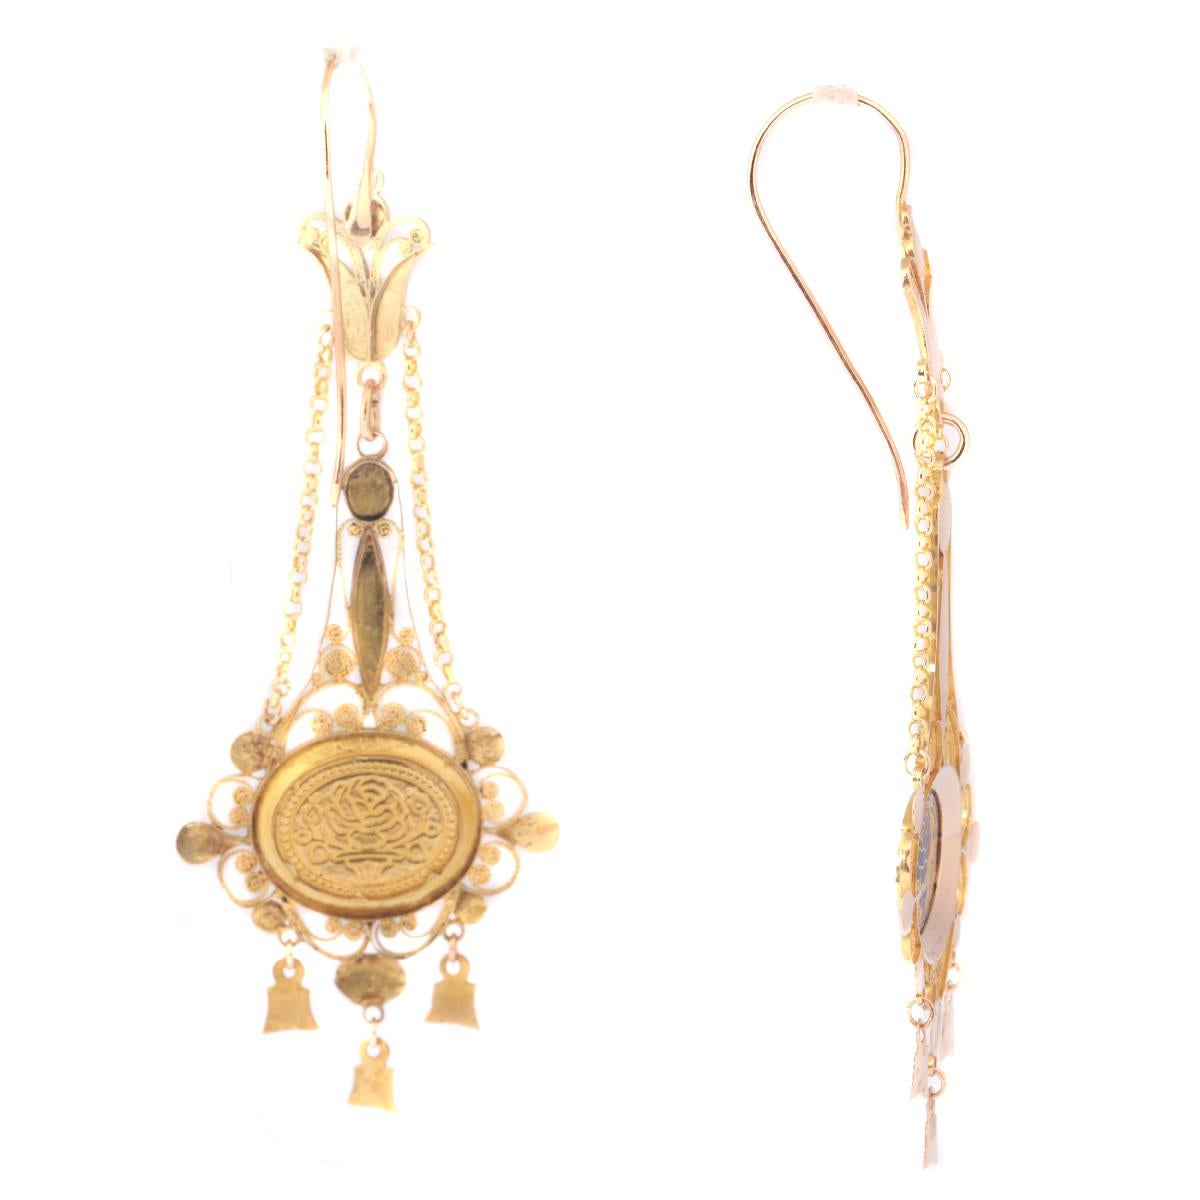 Women's Antique Gold Pendent Earrings with Filigree and Enamel, Early 19th Century